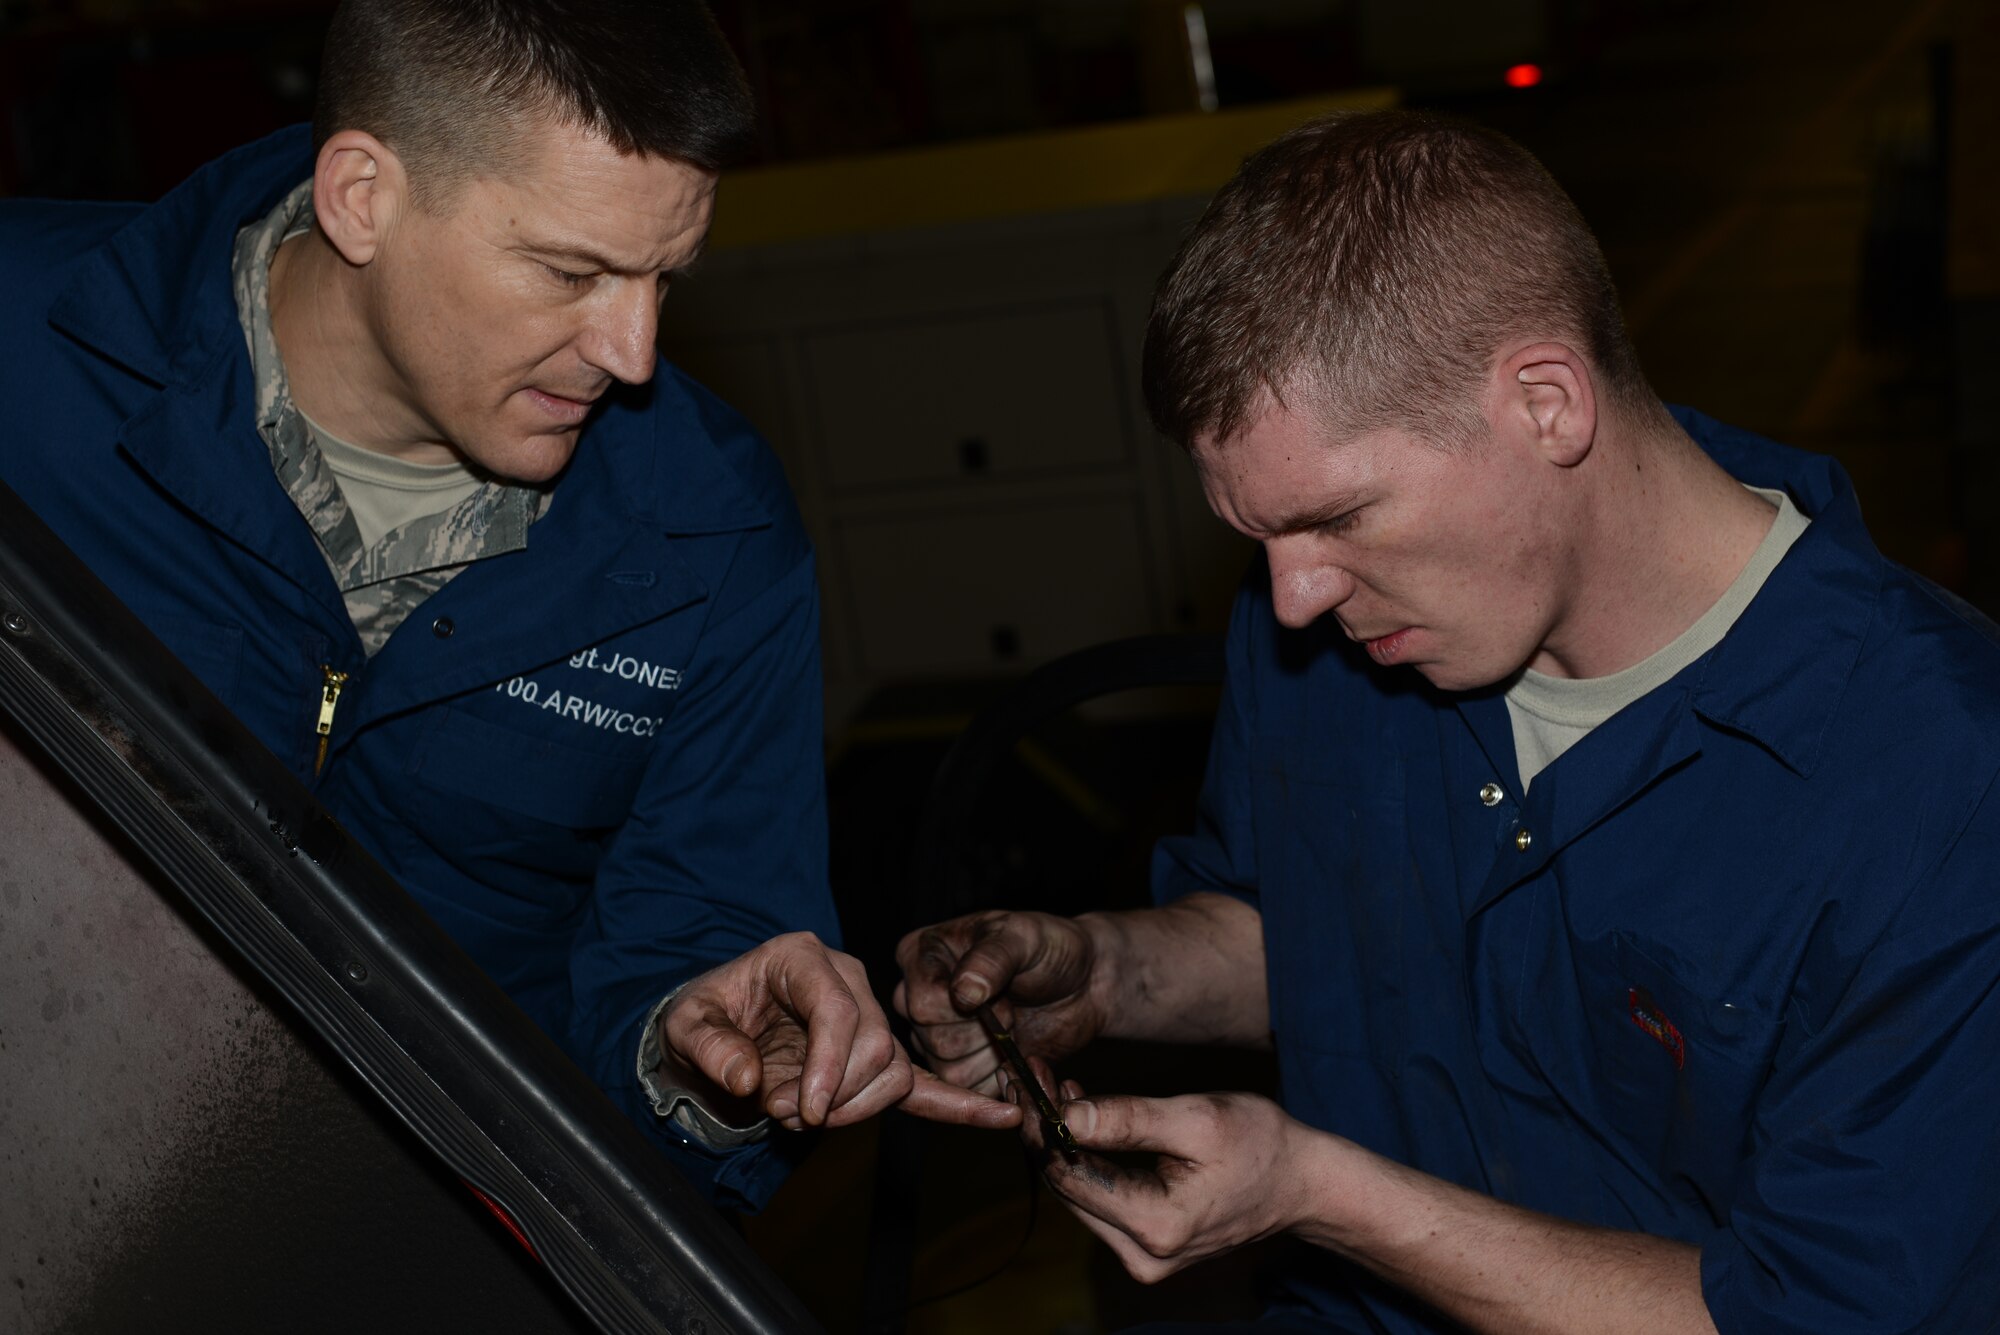 U.S. Air Force Senior Airman Jason Brown, right, 100th Logistics Readiness Squadron vehicle maintenance journeyman from Akron, Ohio, and U.S. Air Force Chief Master Sgt. Tracy Jones, 100th Air Refueling Wing command chief, check a fire truck’s dipstick Jan. 23, 2014, on RAF Mildenhall, England. Brown and Jones repeatedly checked the oil level in the fire truck to ensure it wasn’t over-filled. Brown showed Jones how to perform routine maintenance as part of the “Dirty Jobs” program. (U.S. Air Force photo by Airman 1st Class Preston Webb/Released)